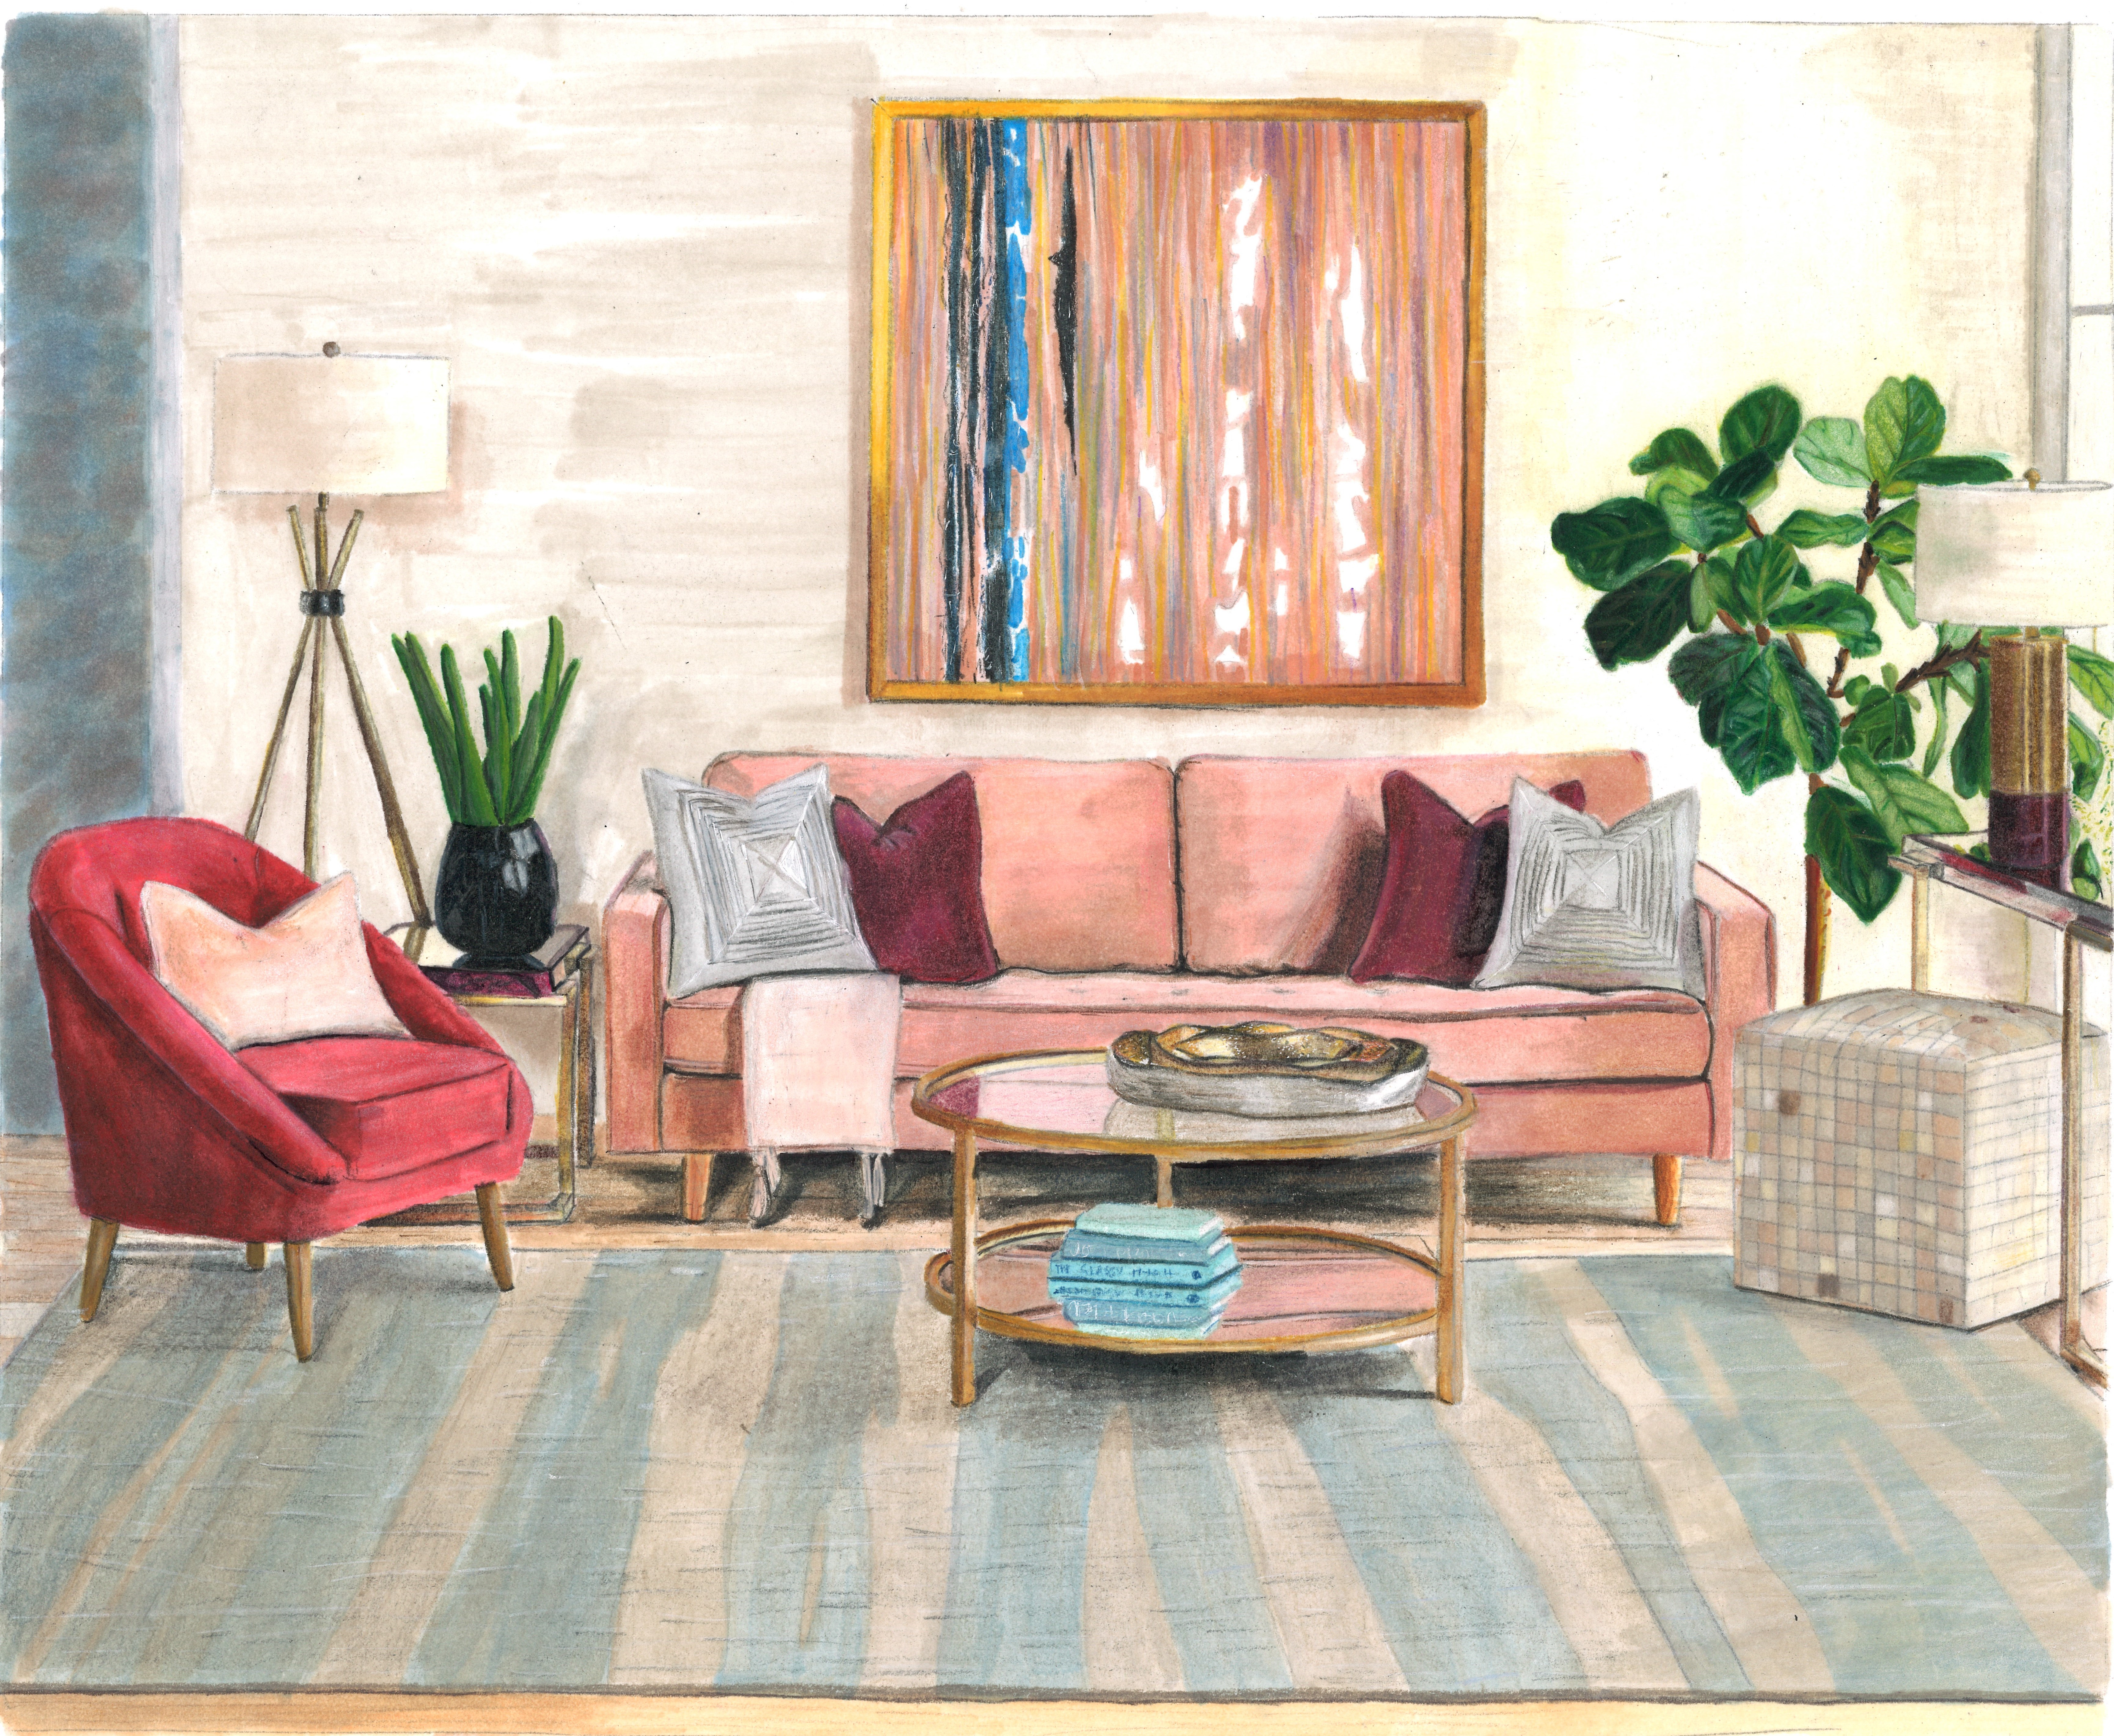 Hand rendering of a bright and colorful living room with artwork, a sofa, and coffee table.